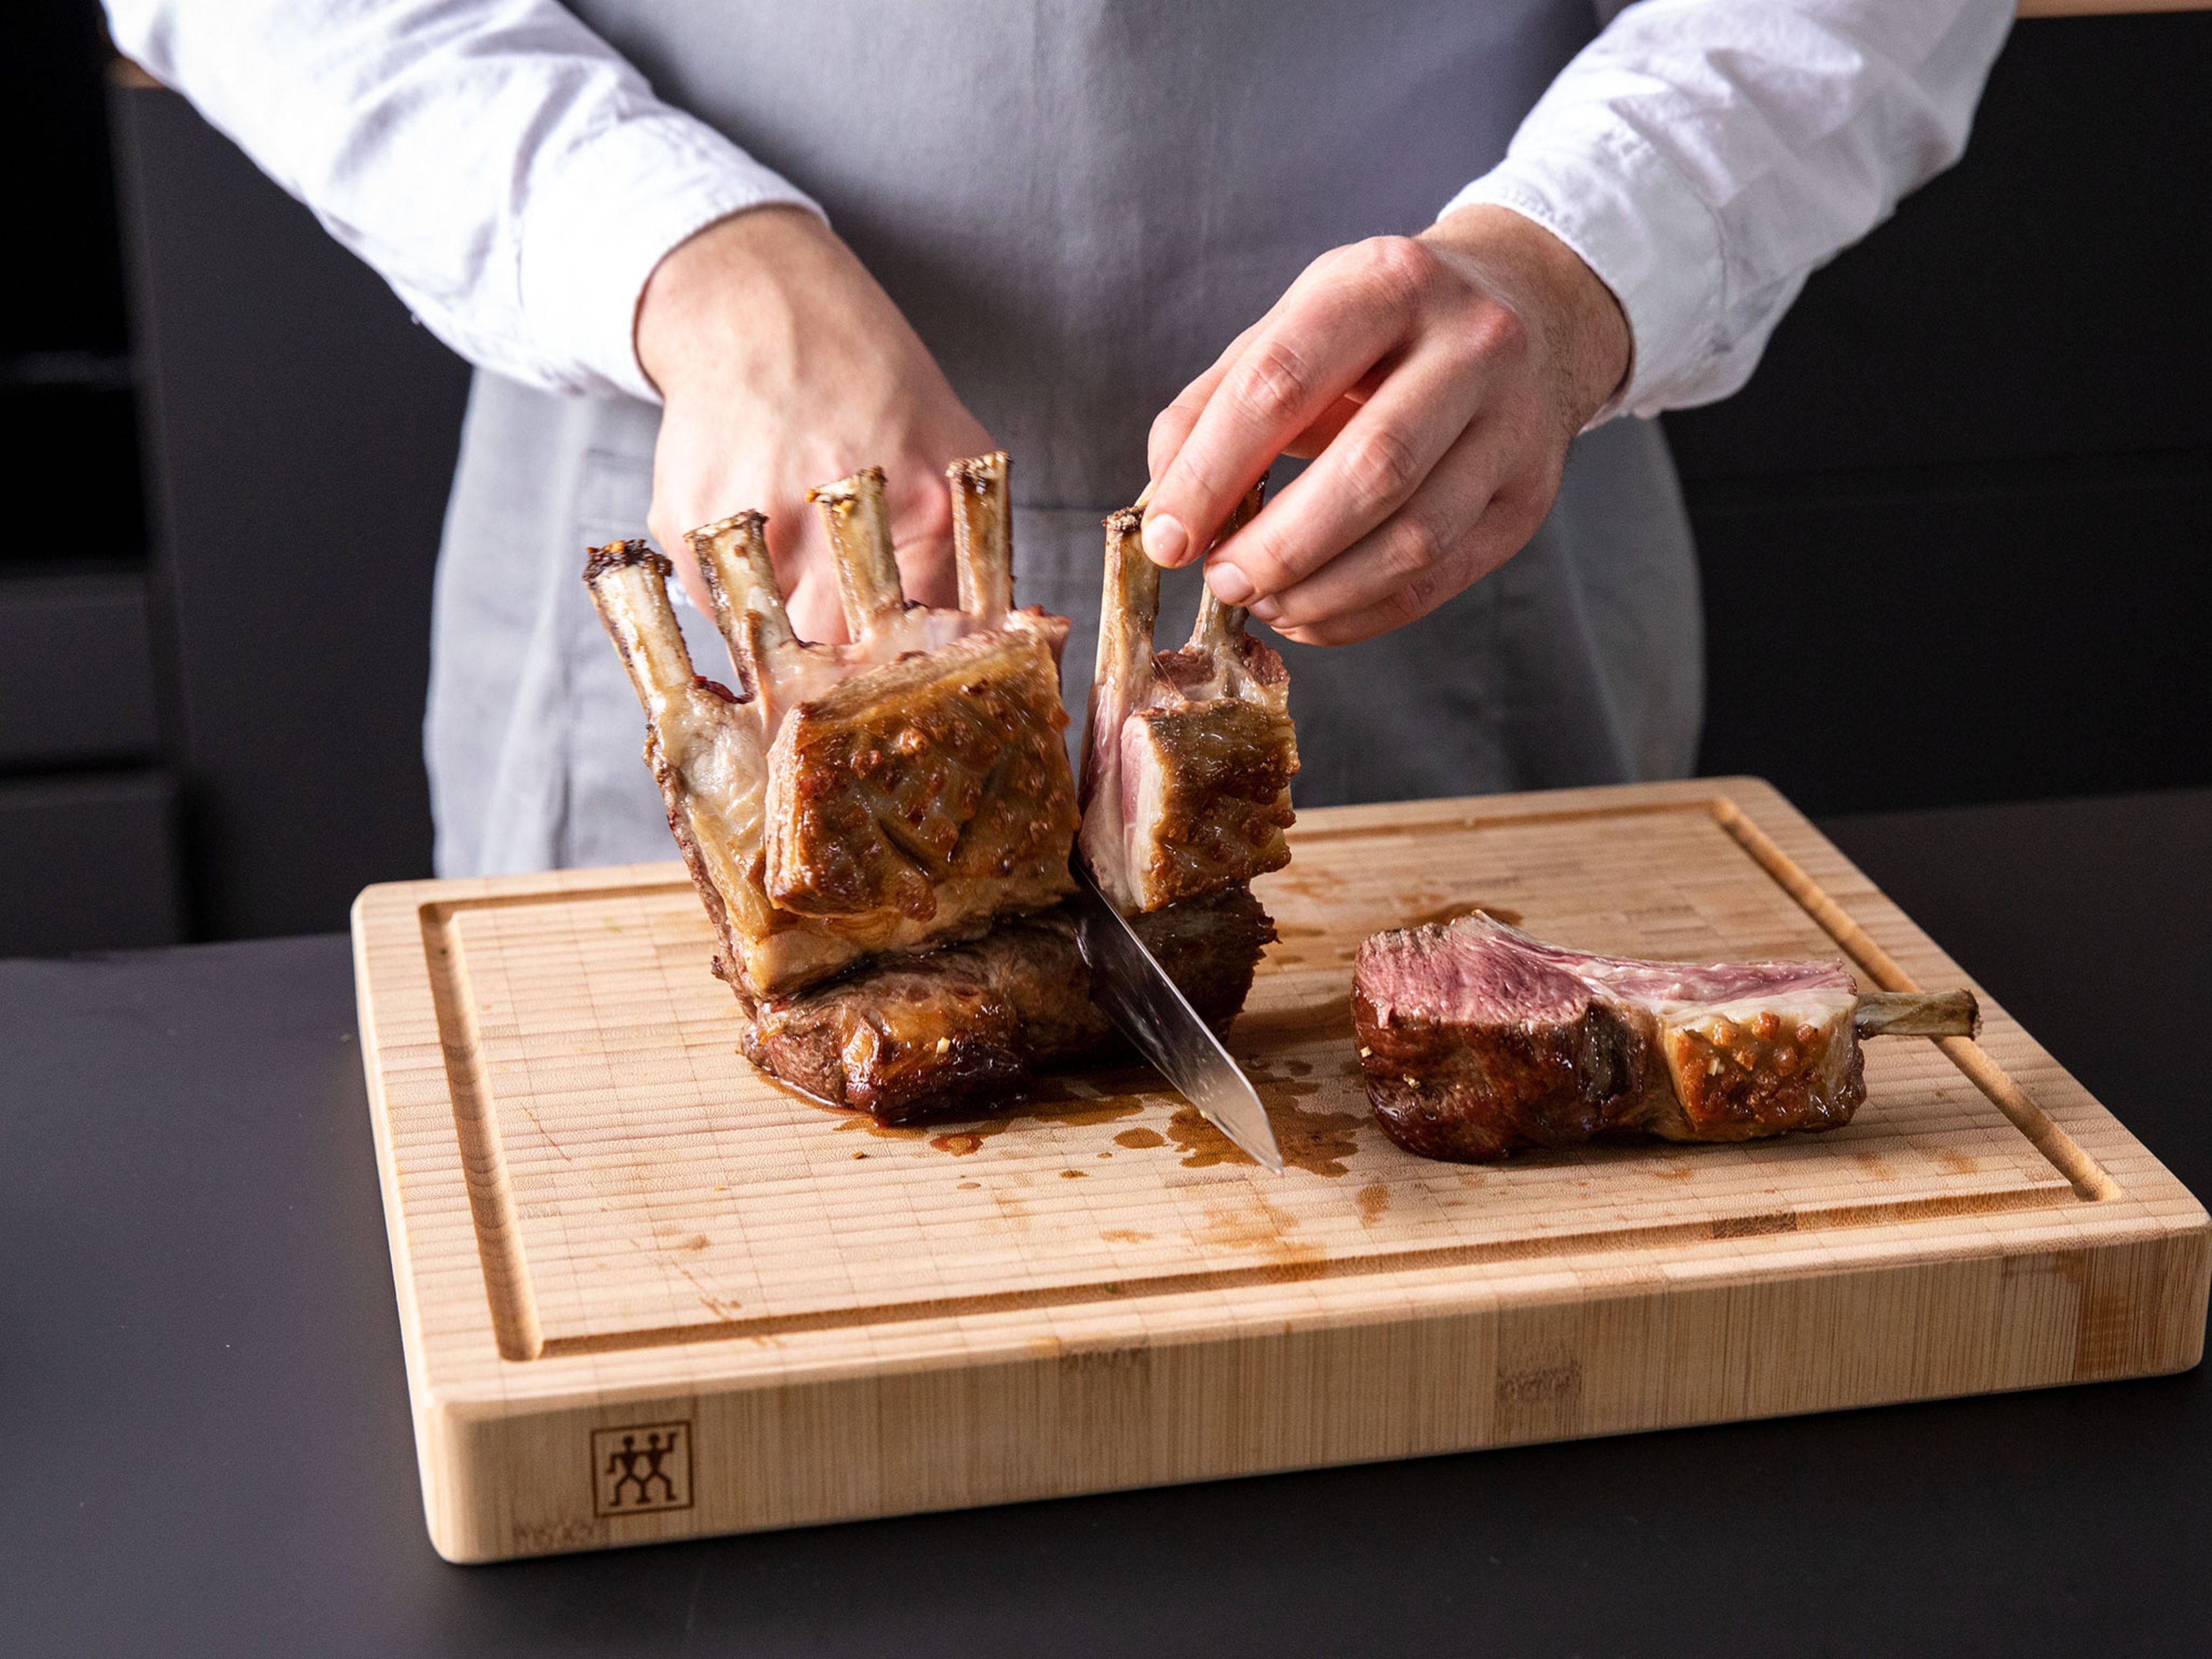 Slice the lamb into chops and serve with mint sauce. Enjoy!